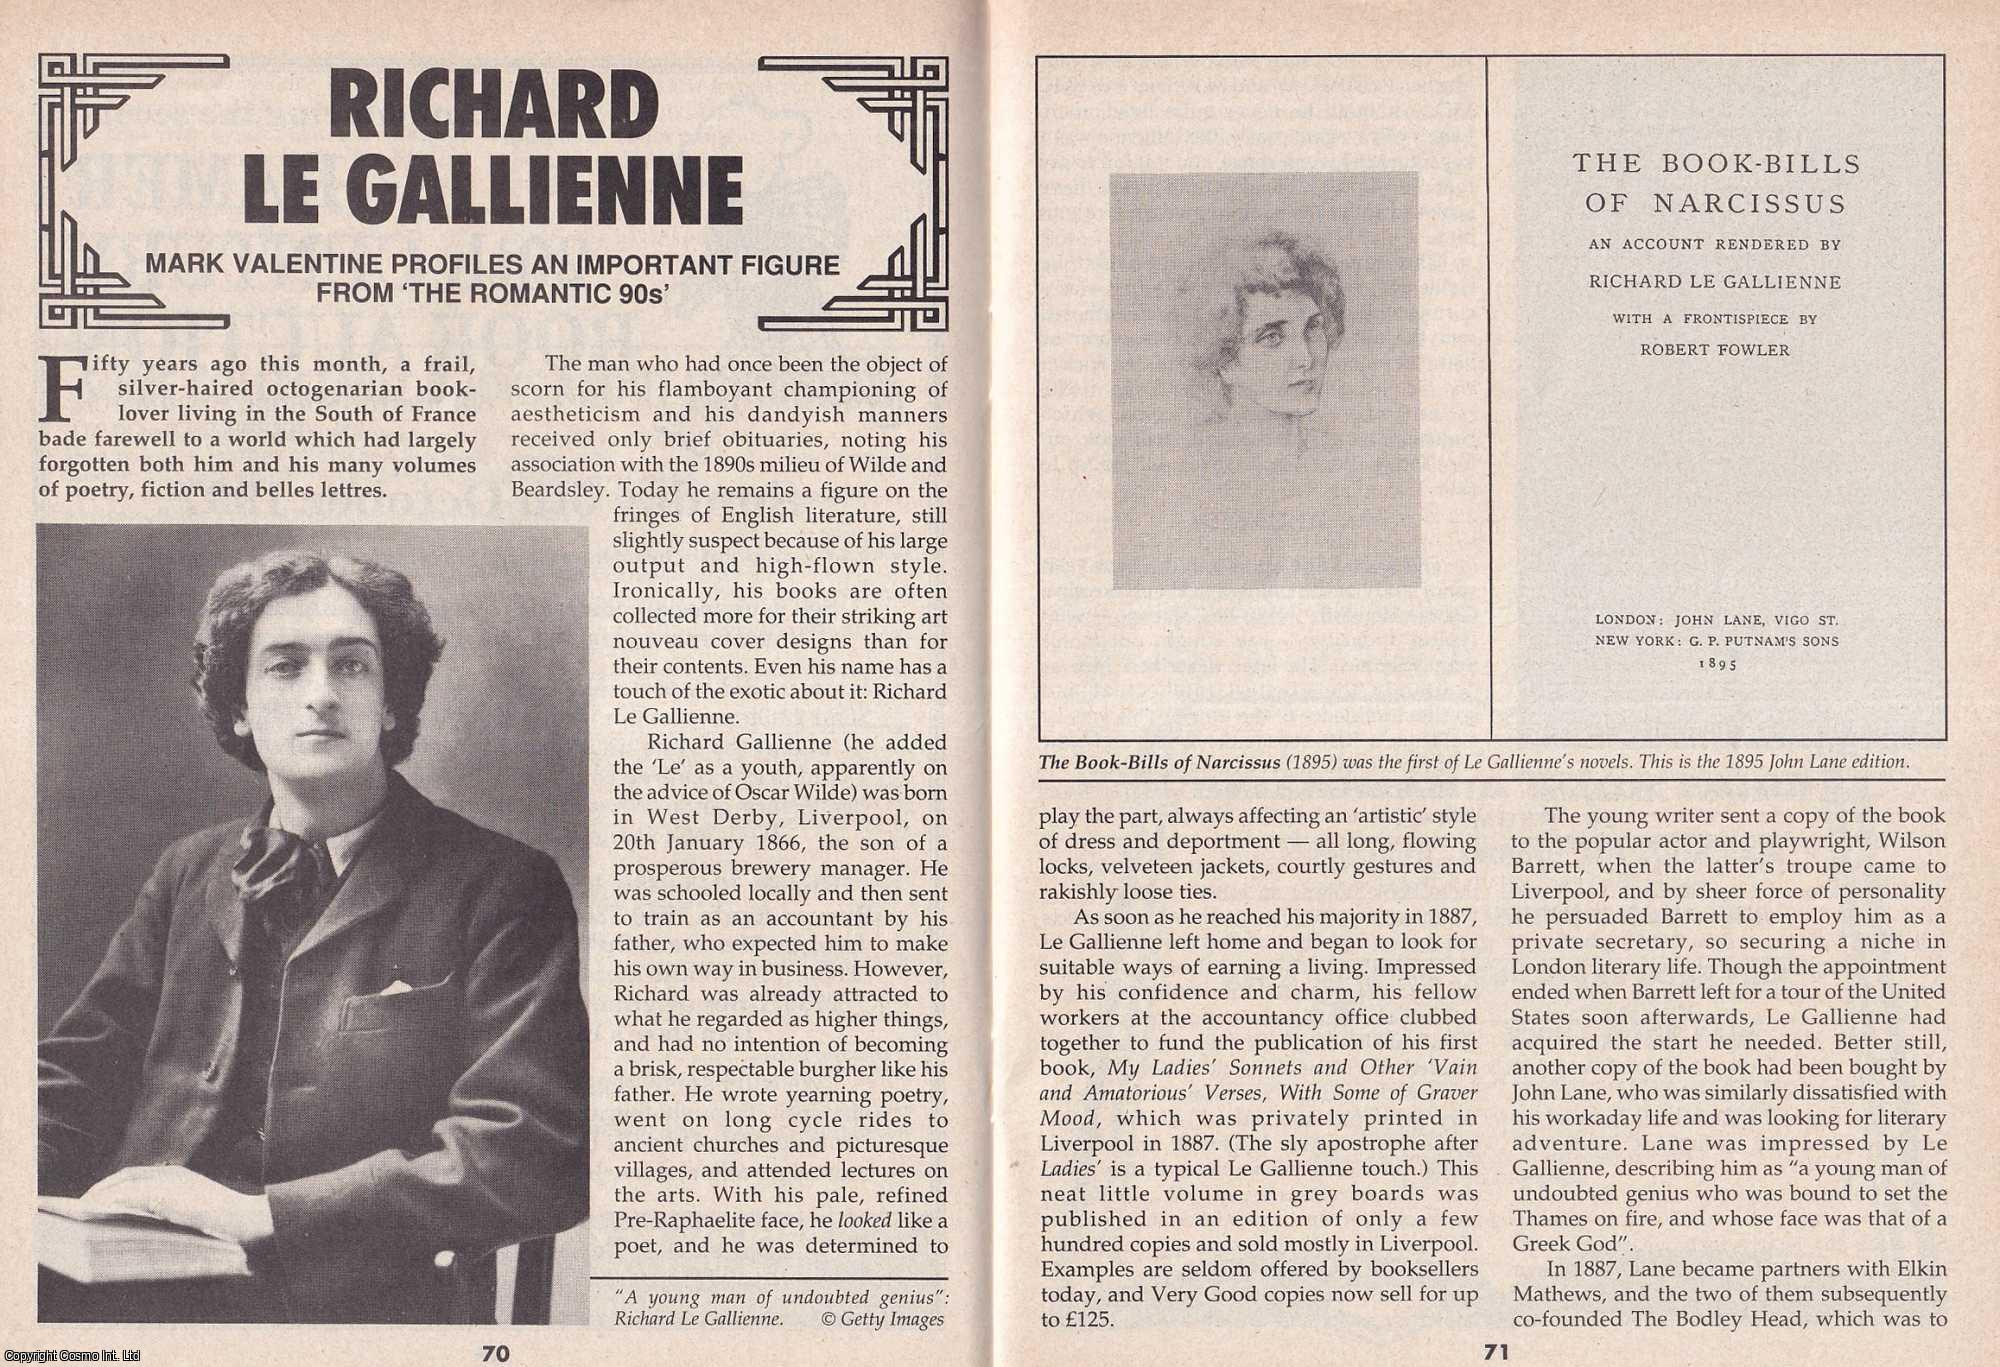 Mark Valentine - Richard Le Gallienne. Profiling an Important Figure from The Romantic 90's. This is an original article separated from an issue of The Book & Magazine Collector publication.